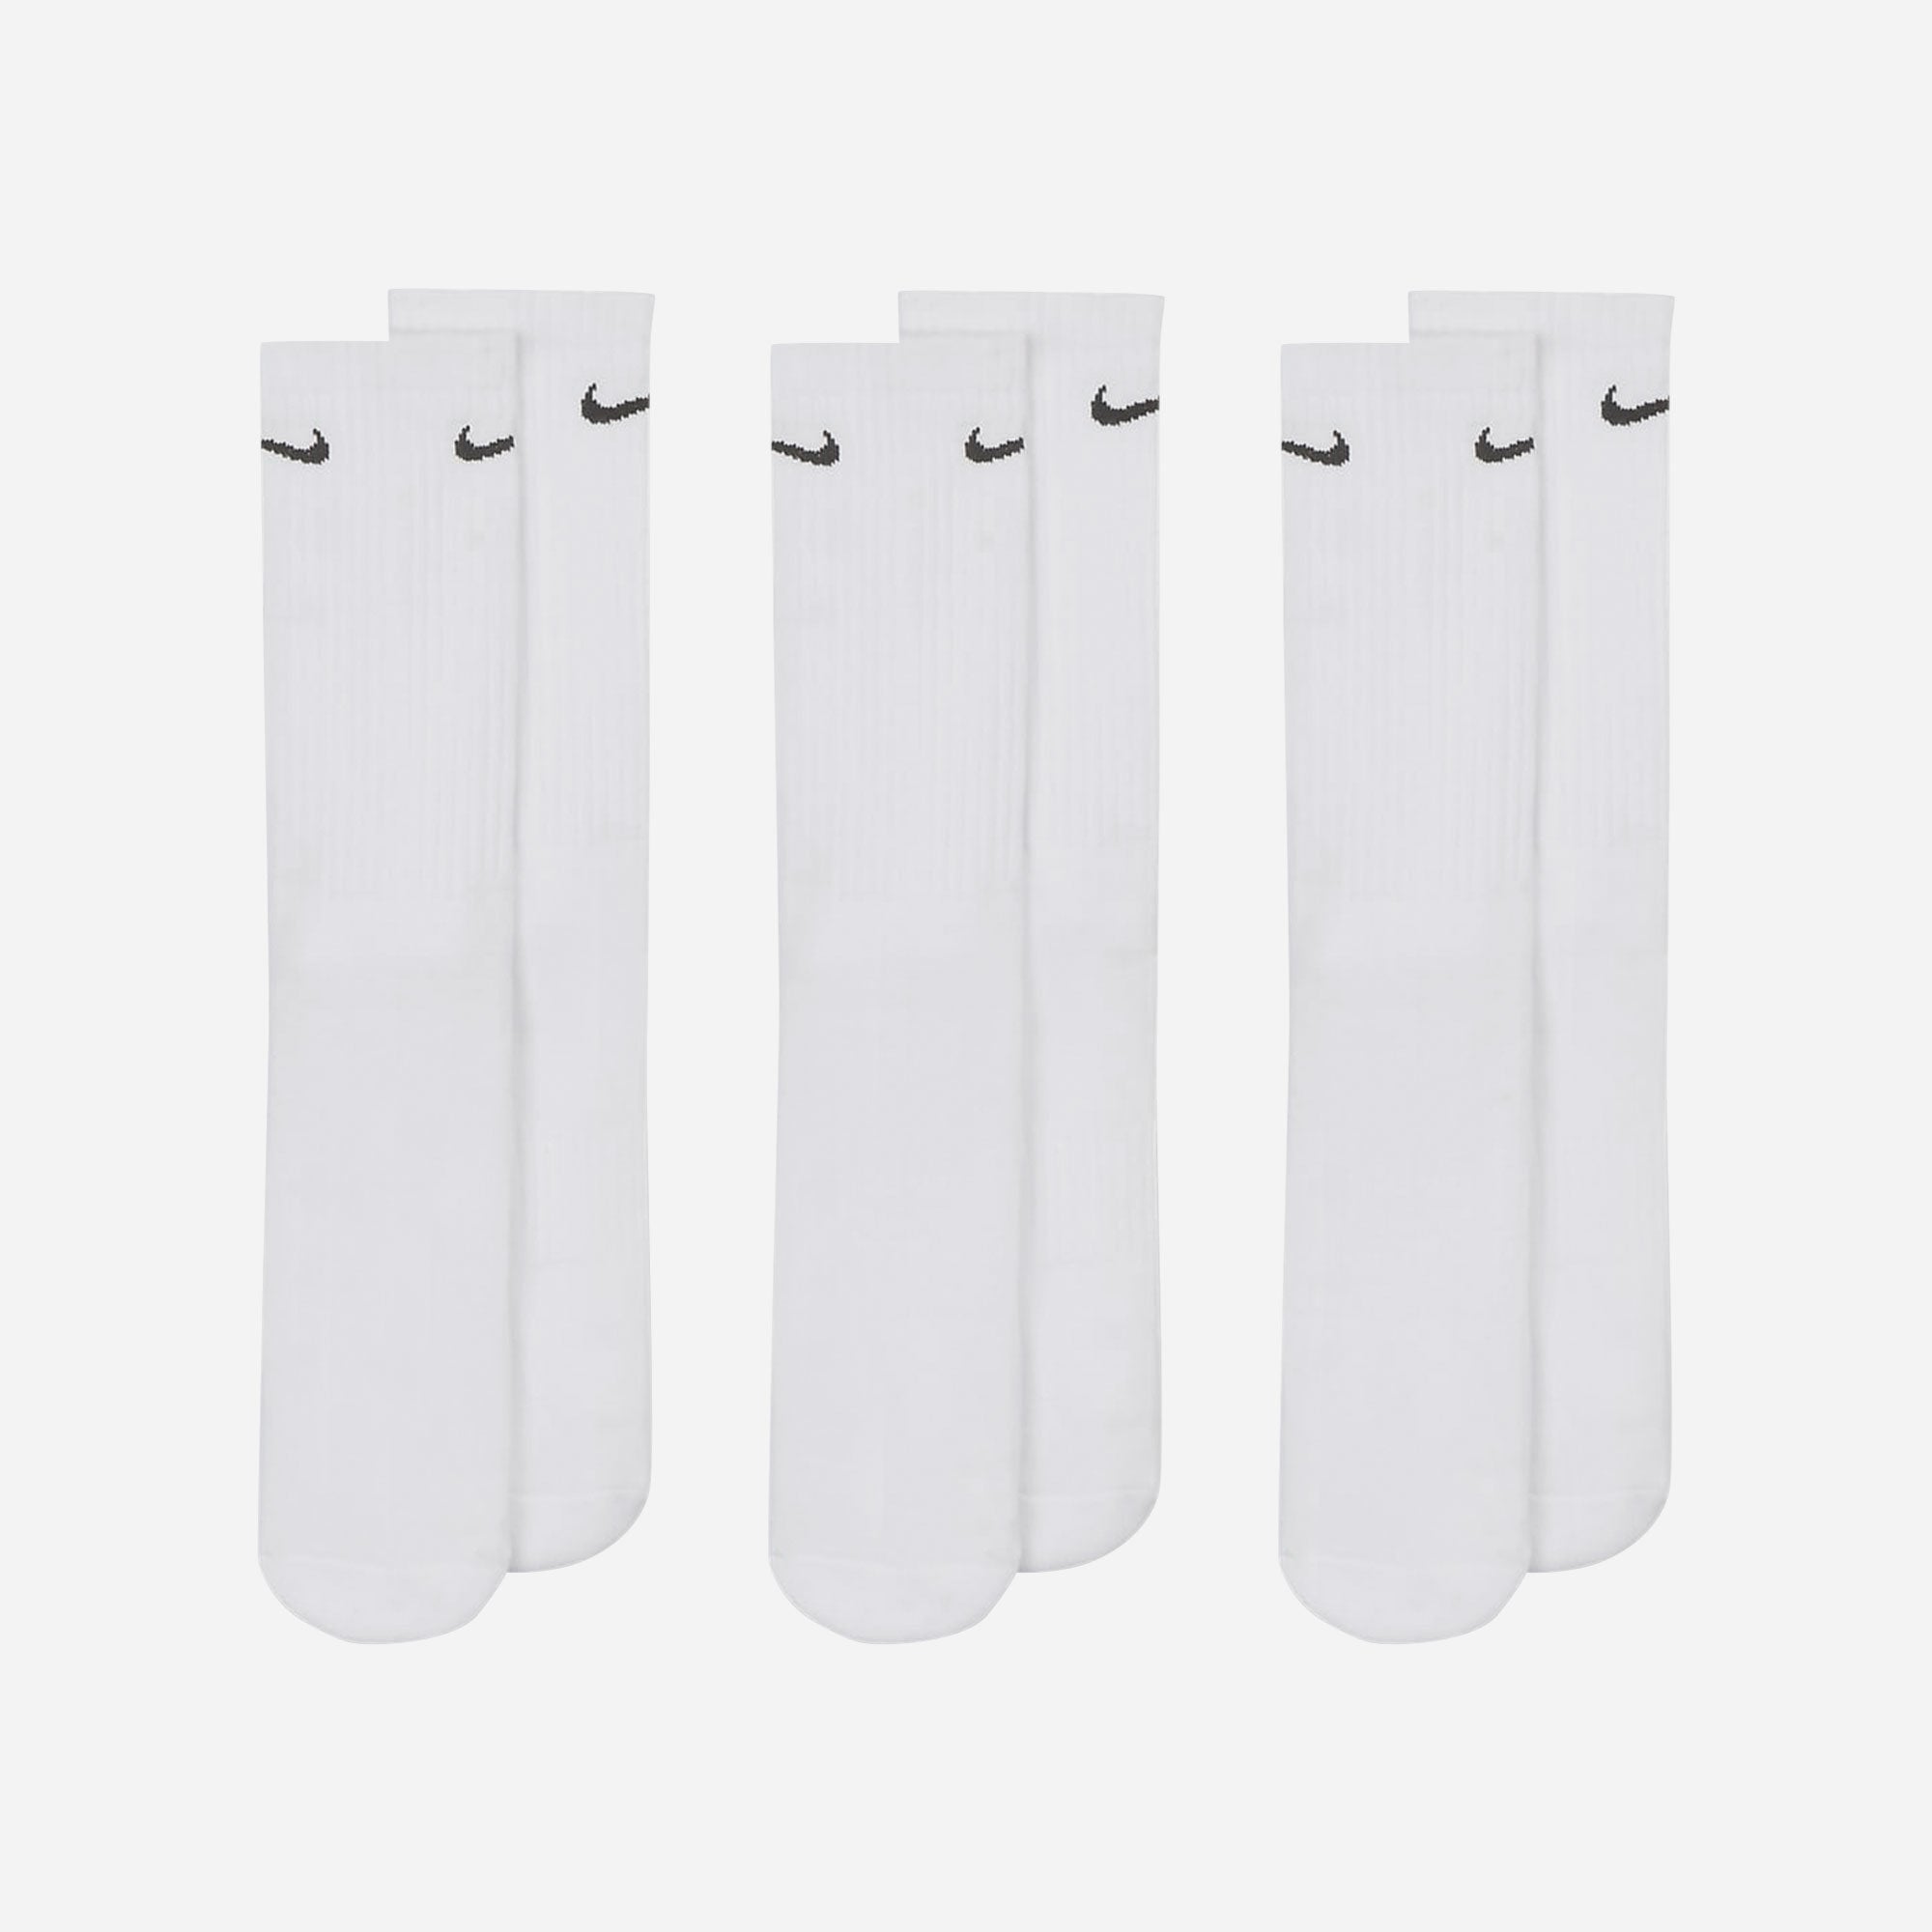 Vớ Thể Thao Nike Everyday Cushioned - Supersports Vietnam